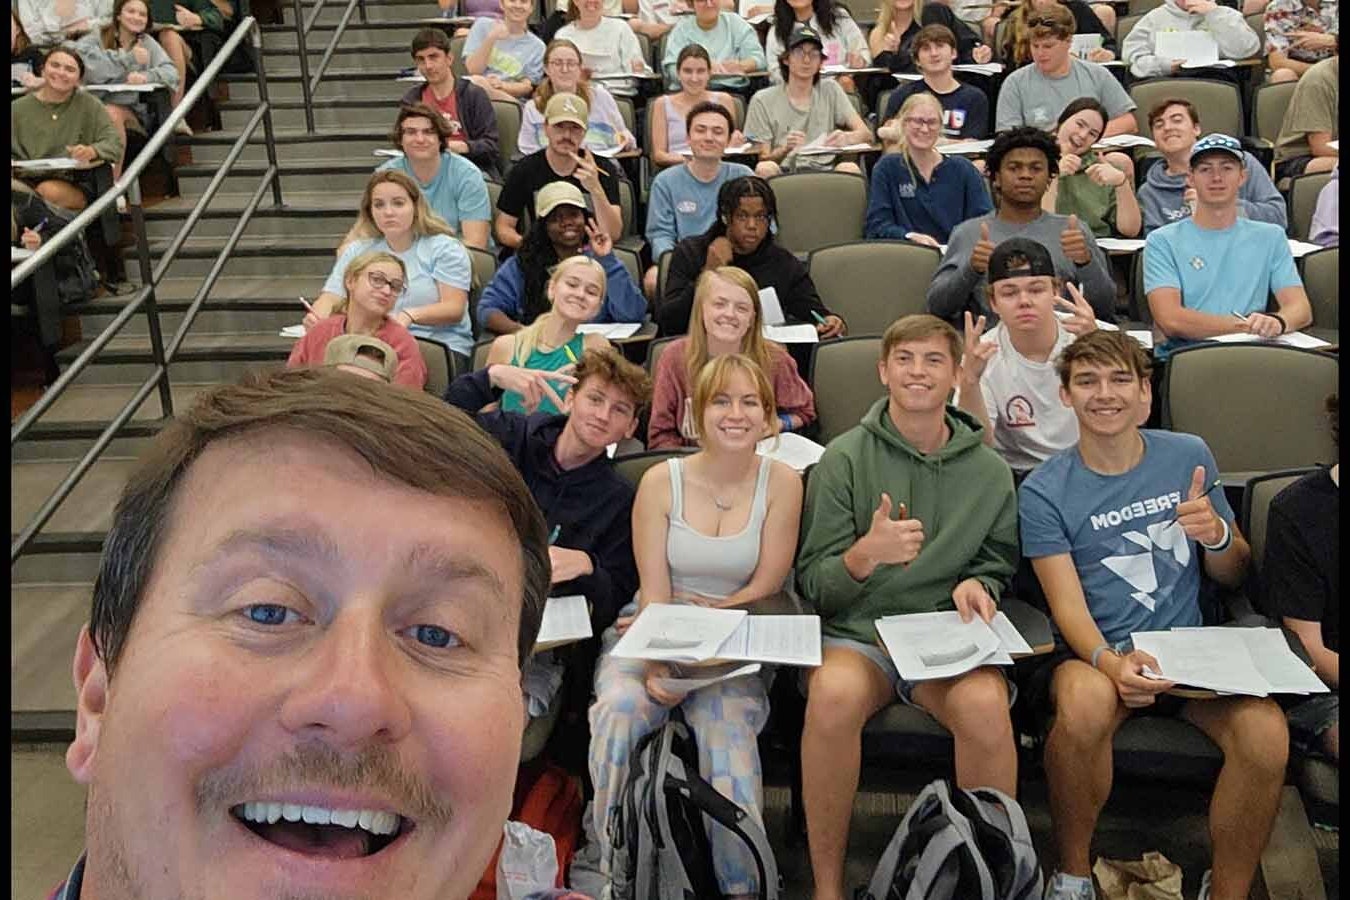 Dr. Matt Wielicki takes a selfie with students on his last day of teaching at the University of Alabama.